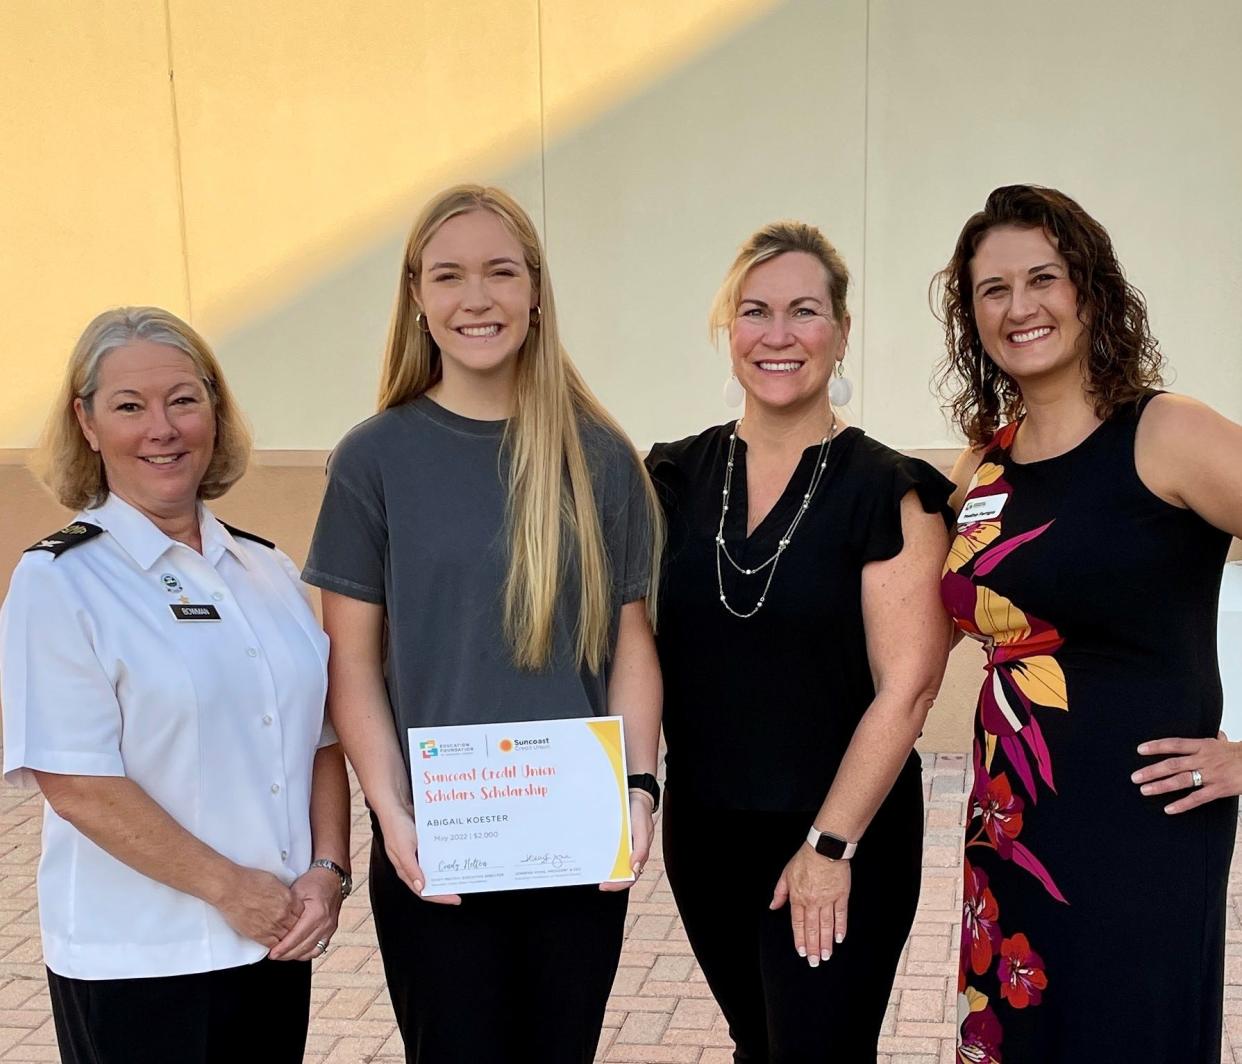 Abigail Koester of Sarasota Military Academy receives a Suncoast Credit Union scholarship. She is joined by Christina Bowman, CEO of SMA, Heather Koester, and Heather Ferrigno of the Education Foundation of Sarasota County.